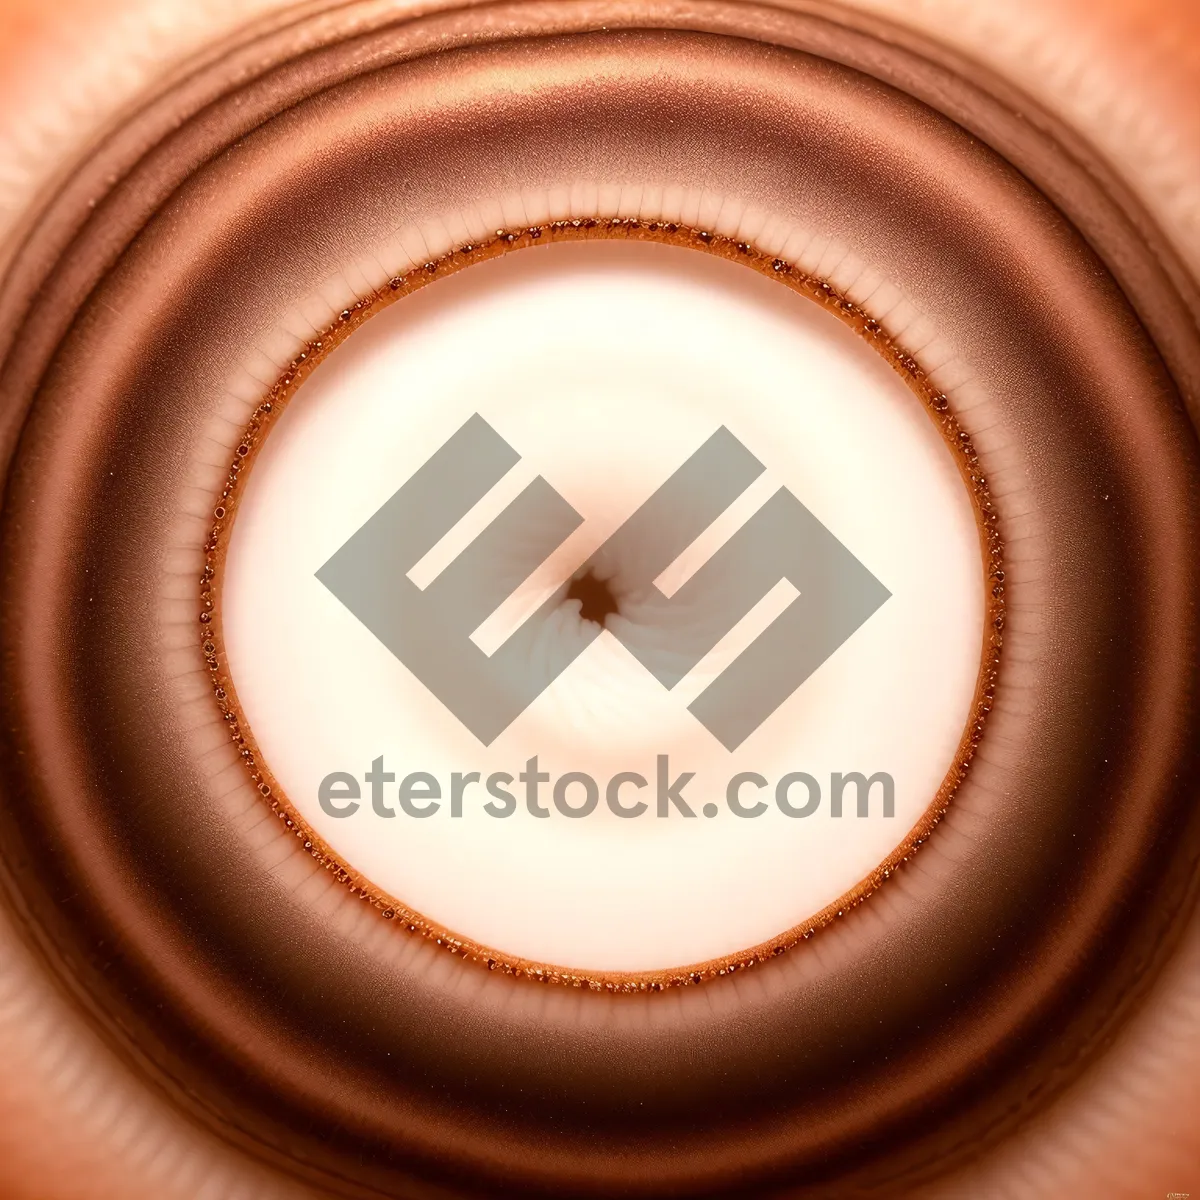 Picture of Chocolate Swirl Art: Smooth and Colorful Fractal Design